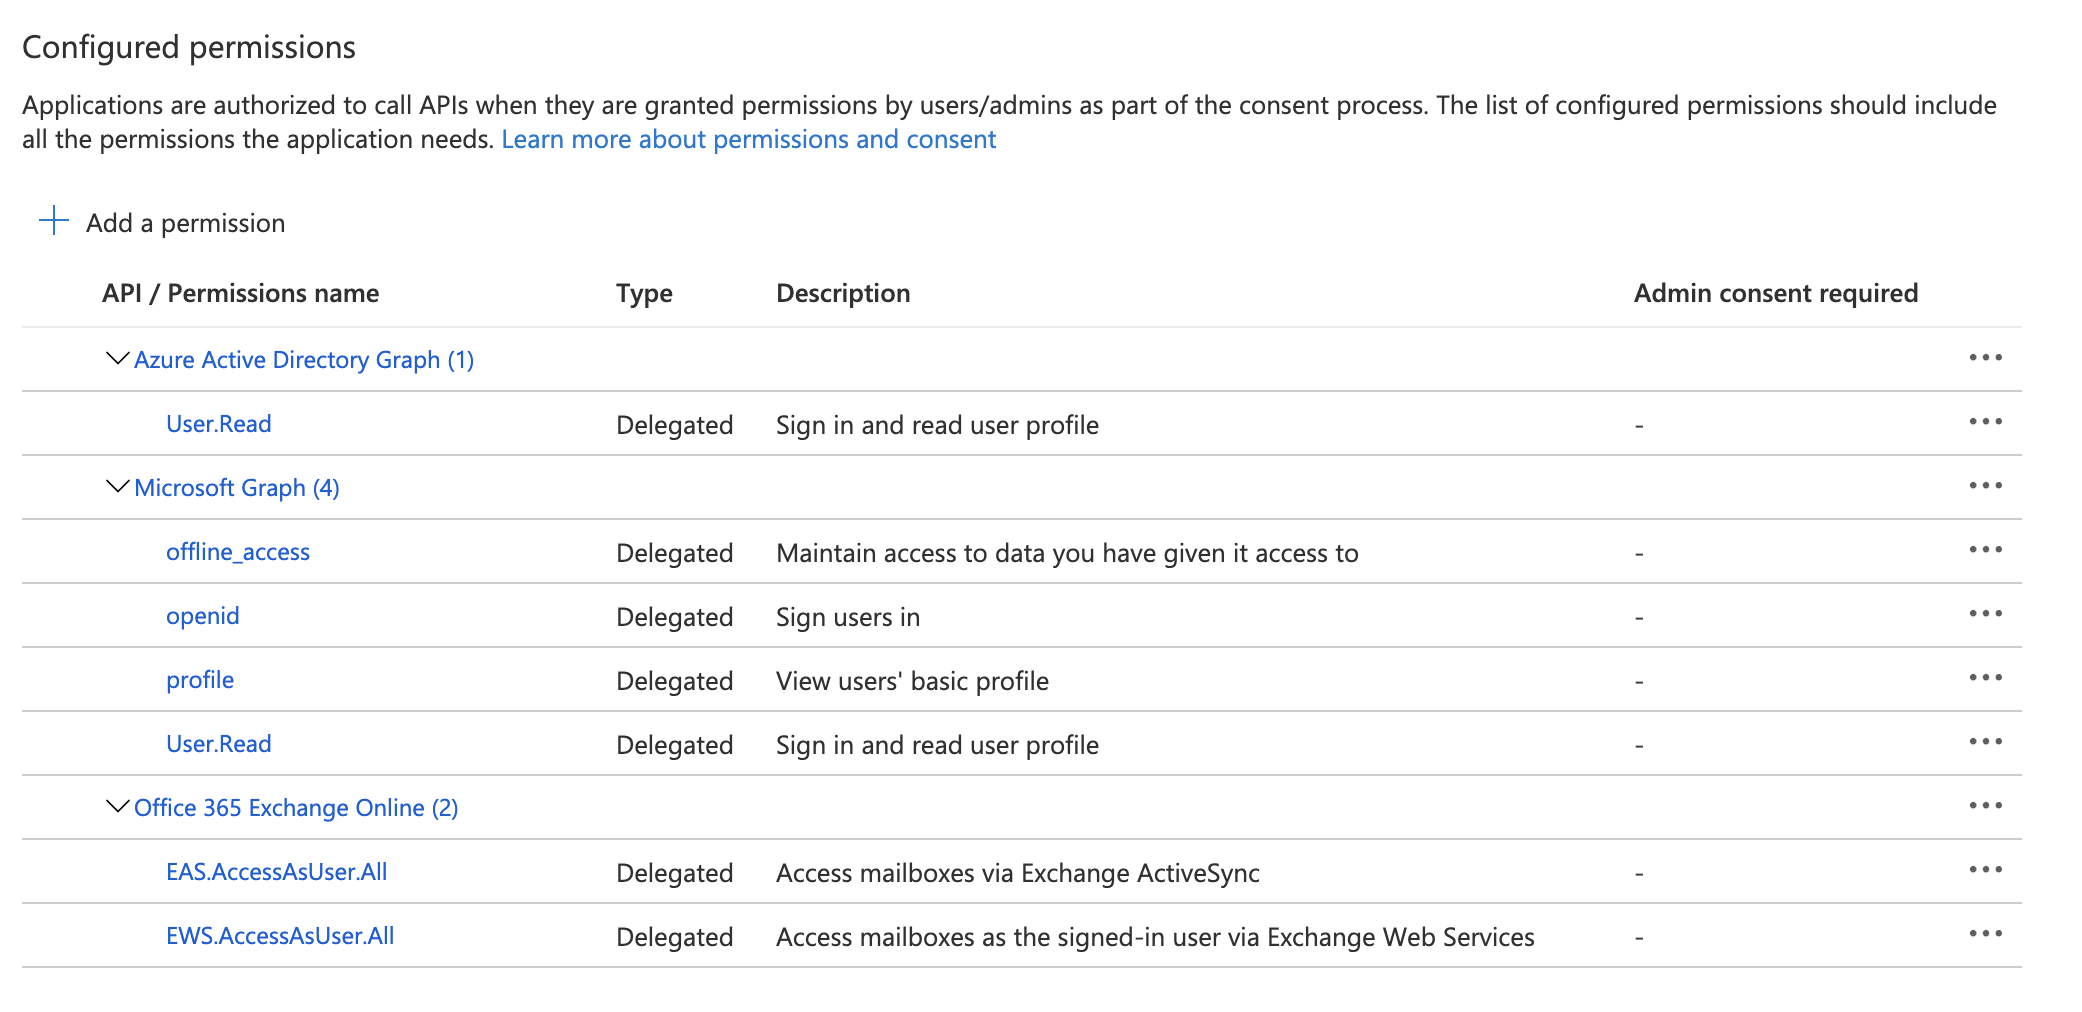 The Microsoft Azure Portal showing the "Configured permissions" page. A list of permissions, their types, and their descriptions is displayed.